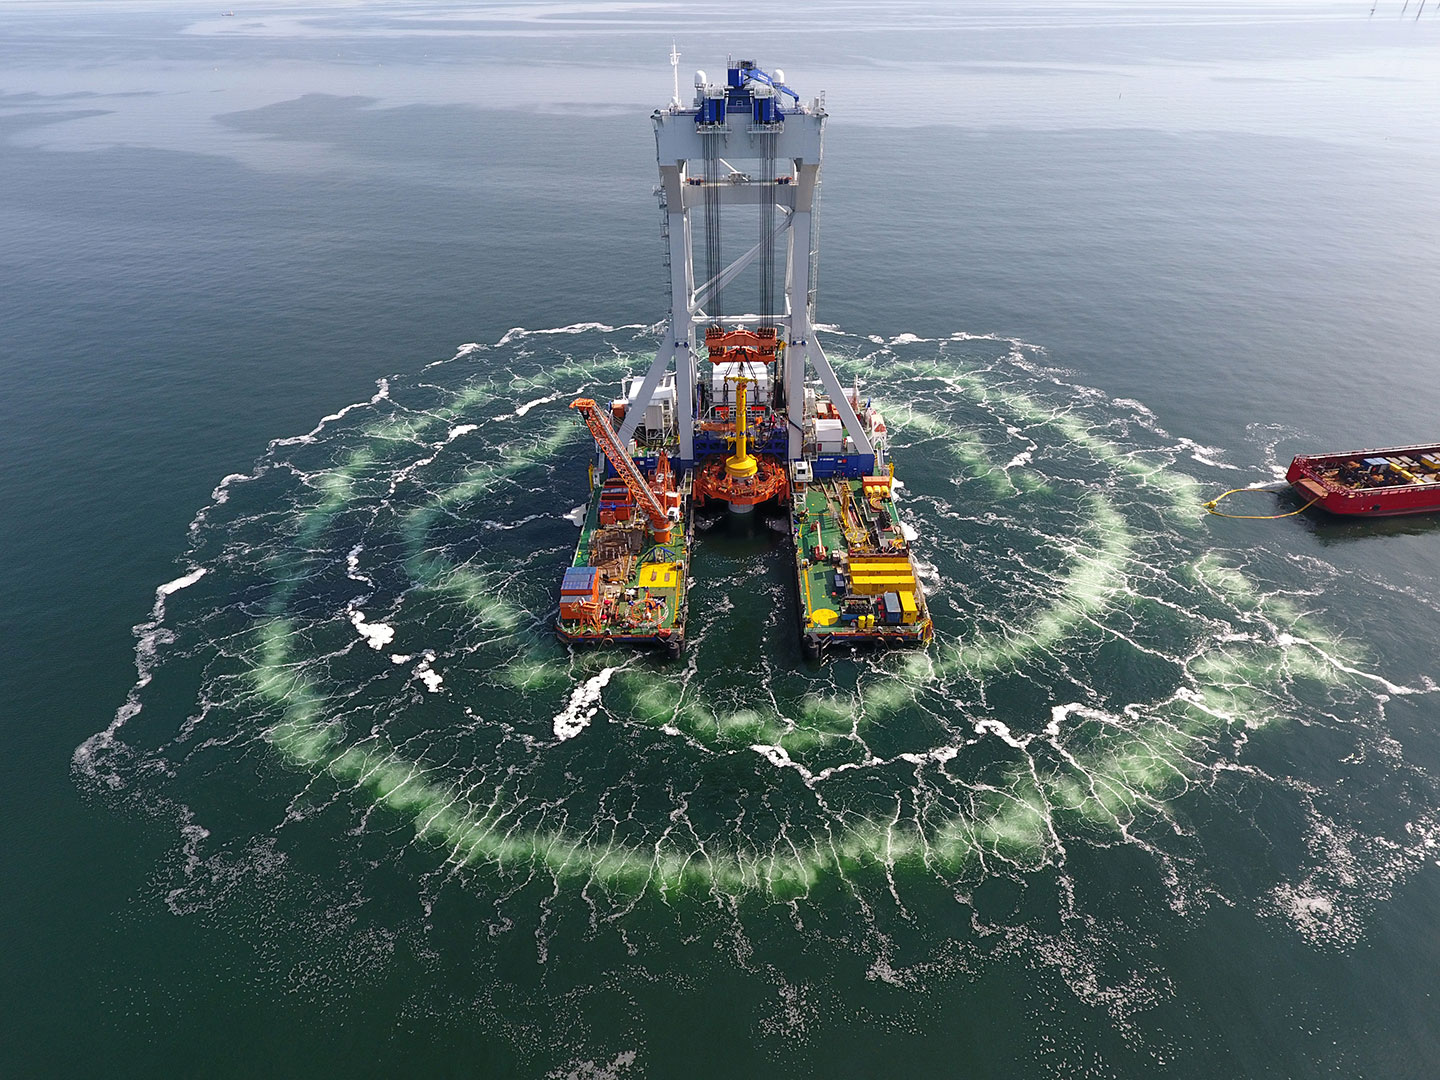 an aerial view of an offshore windfarm being constructed in the ocean. Around the platform being built are rings of bubbles expanding outward into the ocean.